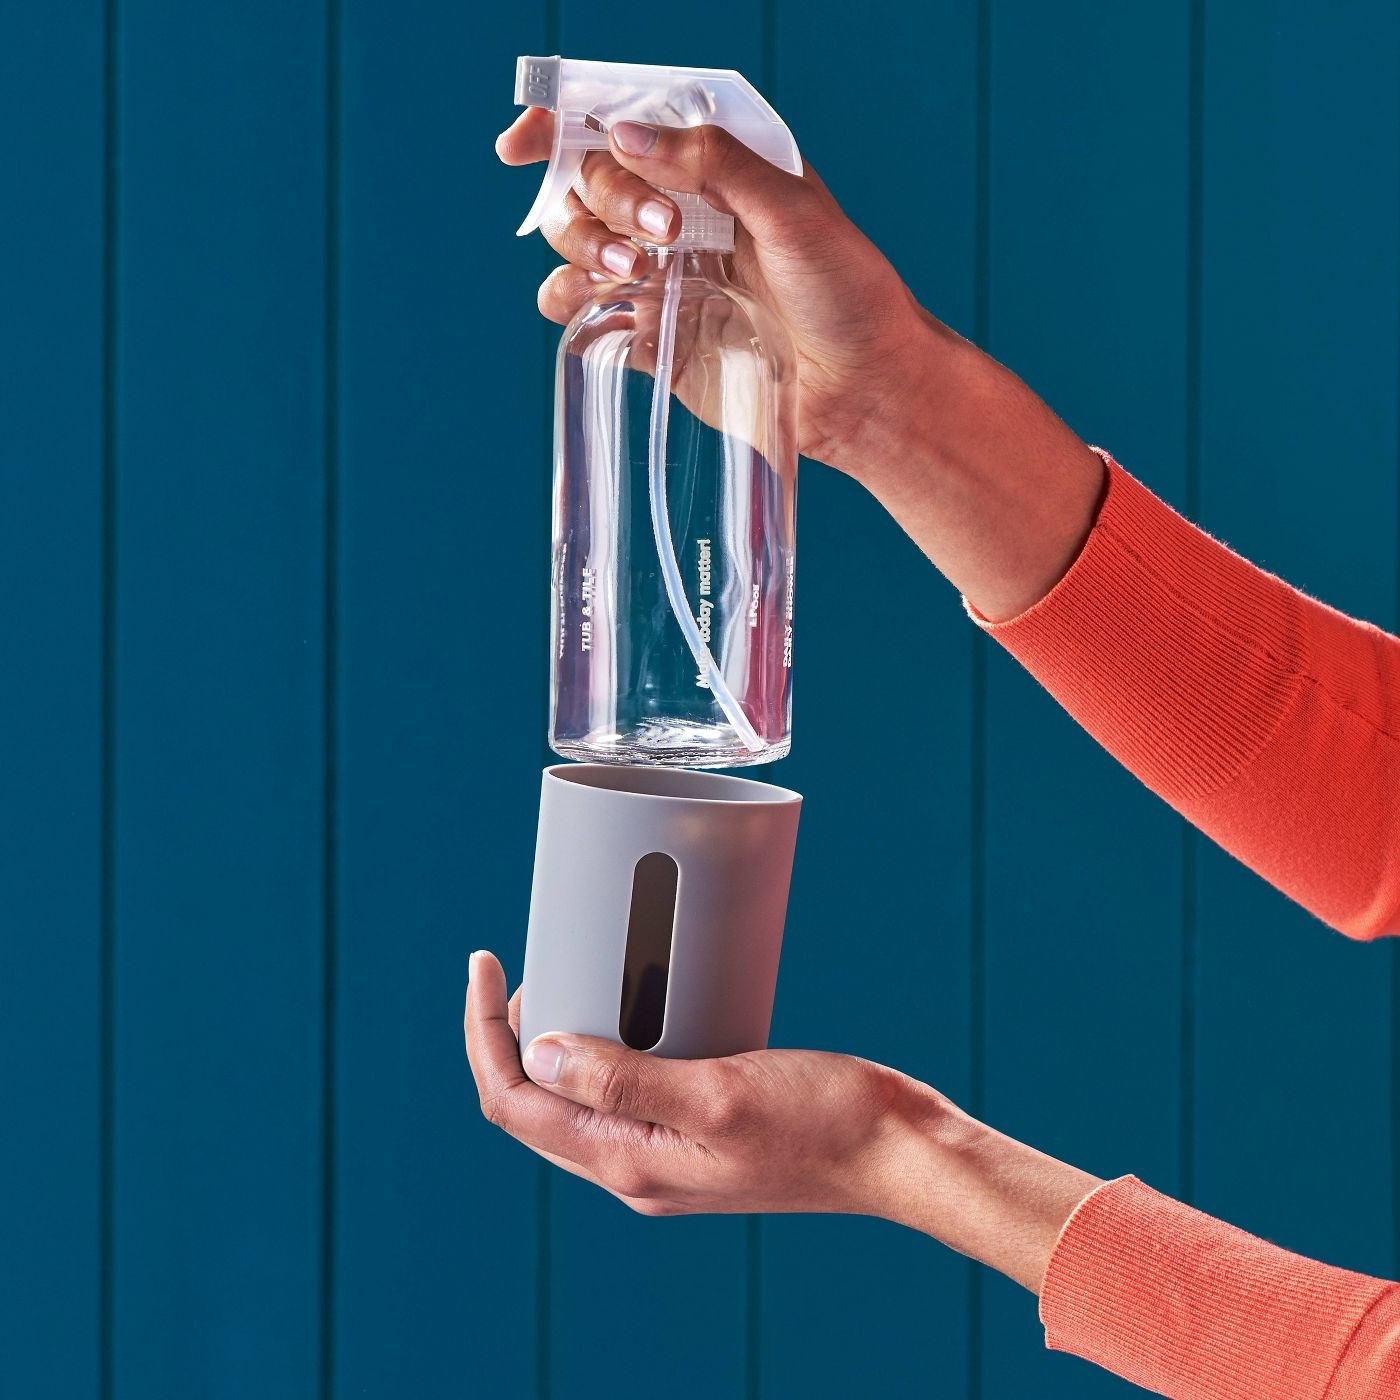 hands holding a reusable glass spray bottle and gray silicon sleeve